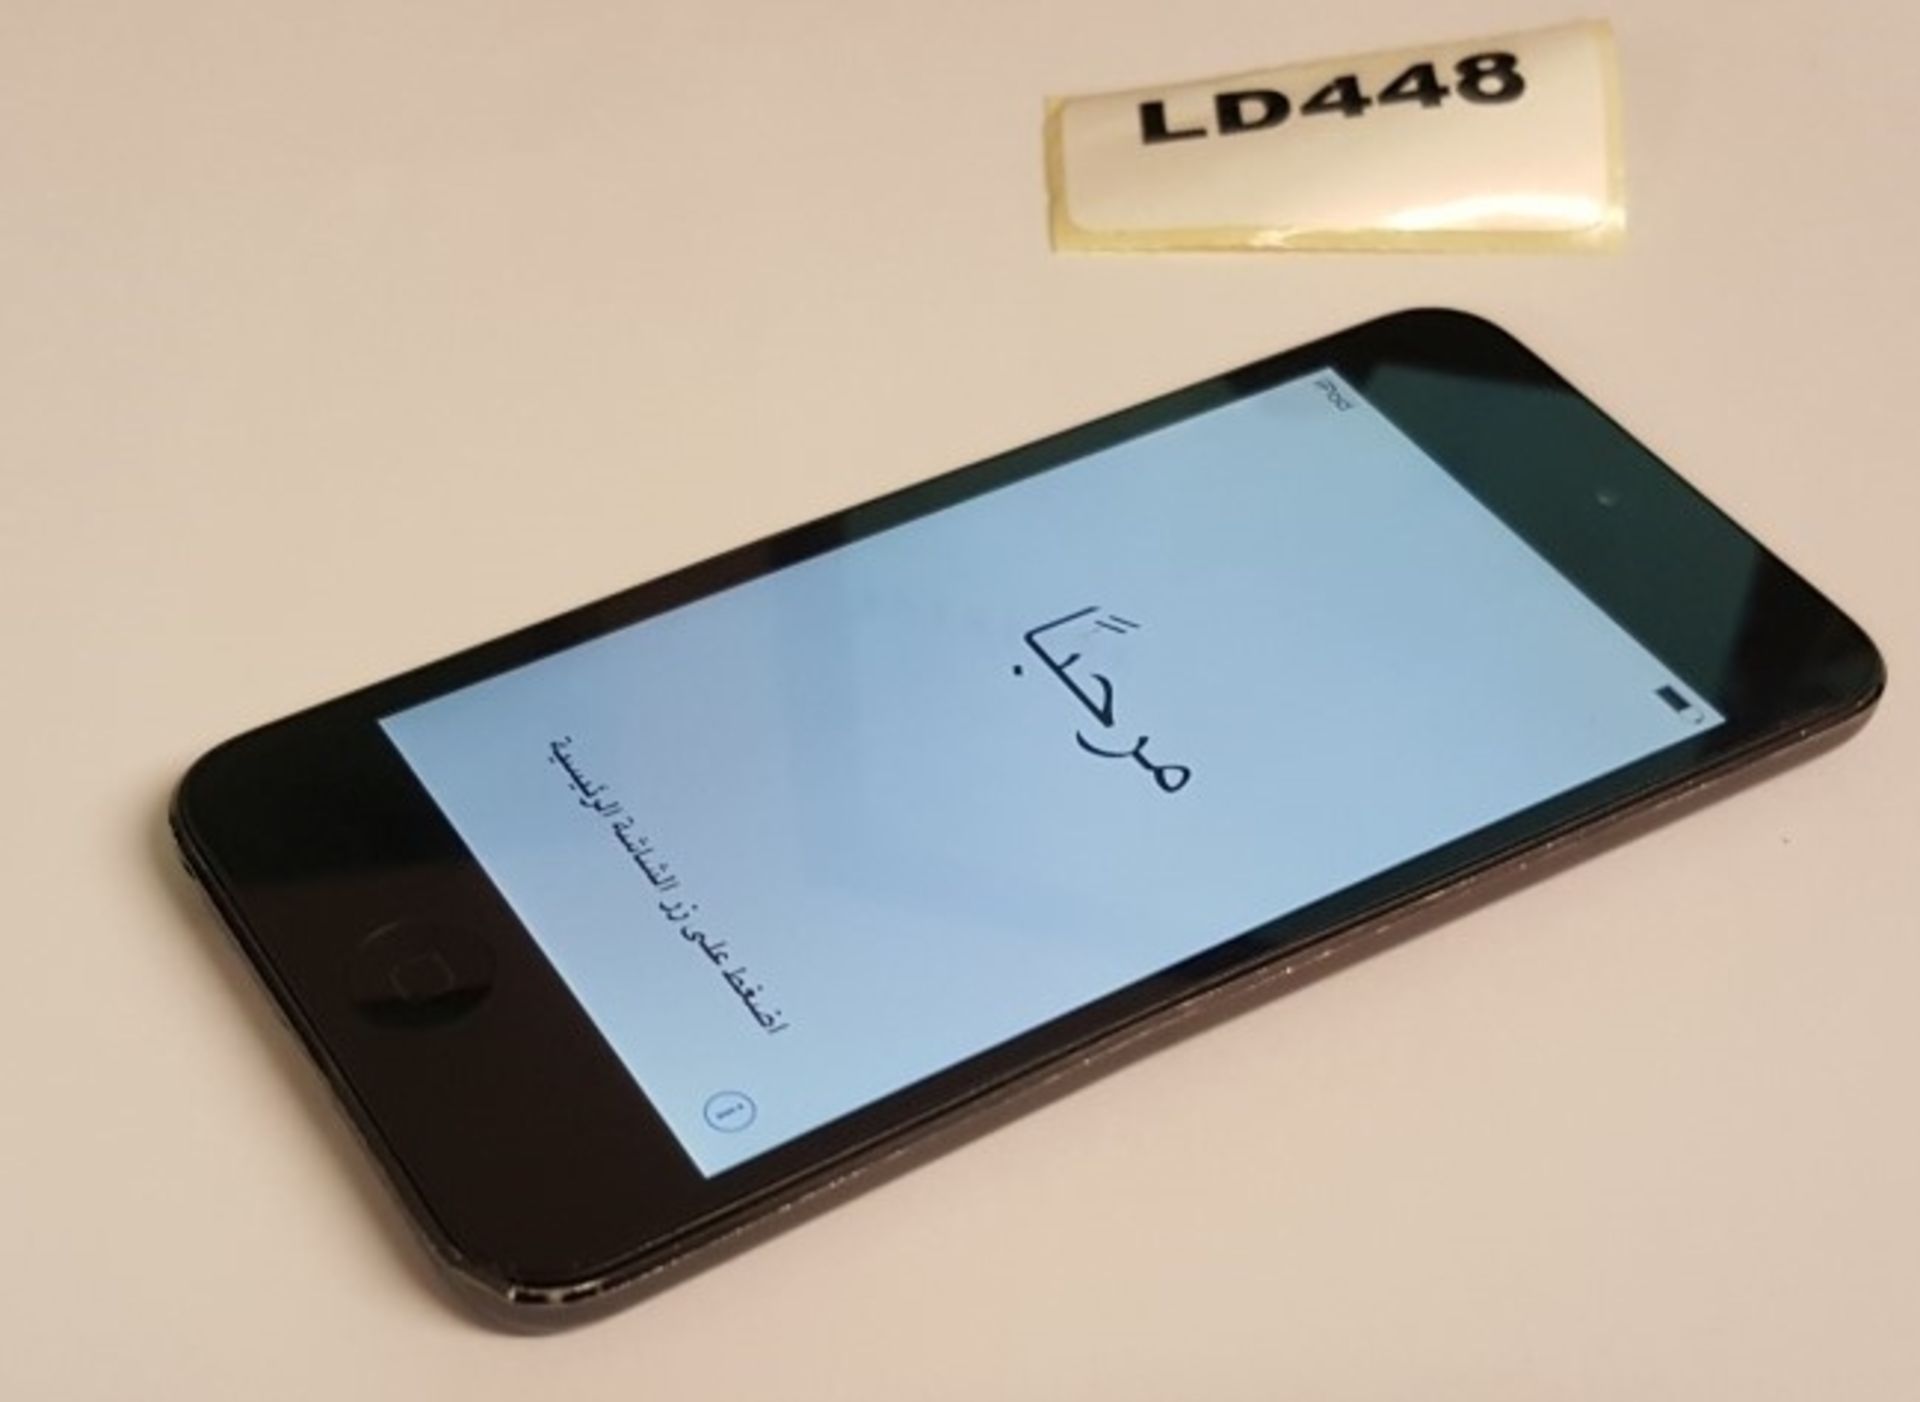 1 x APPLE IPOD TOUCH 6th GEN 16GB IN Dark Space Gray A1574 - LD448 BR - CL461 - Location: Altrincham - Image 2 of 4